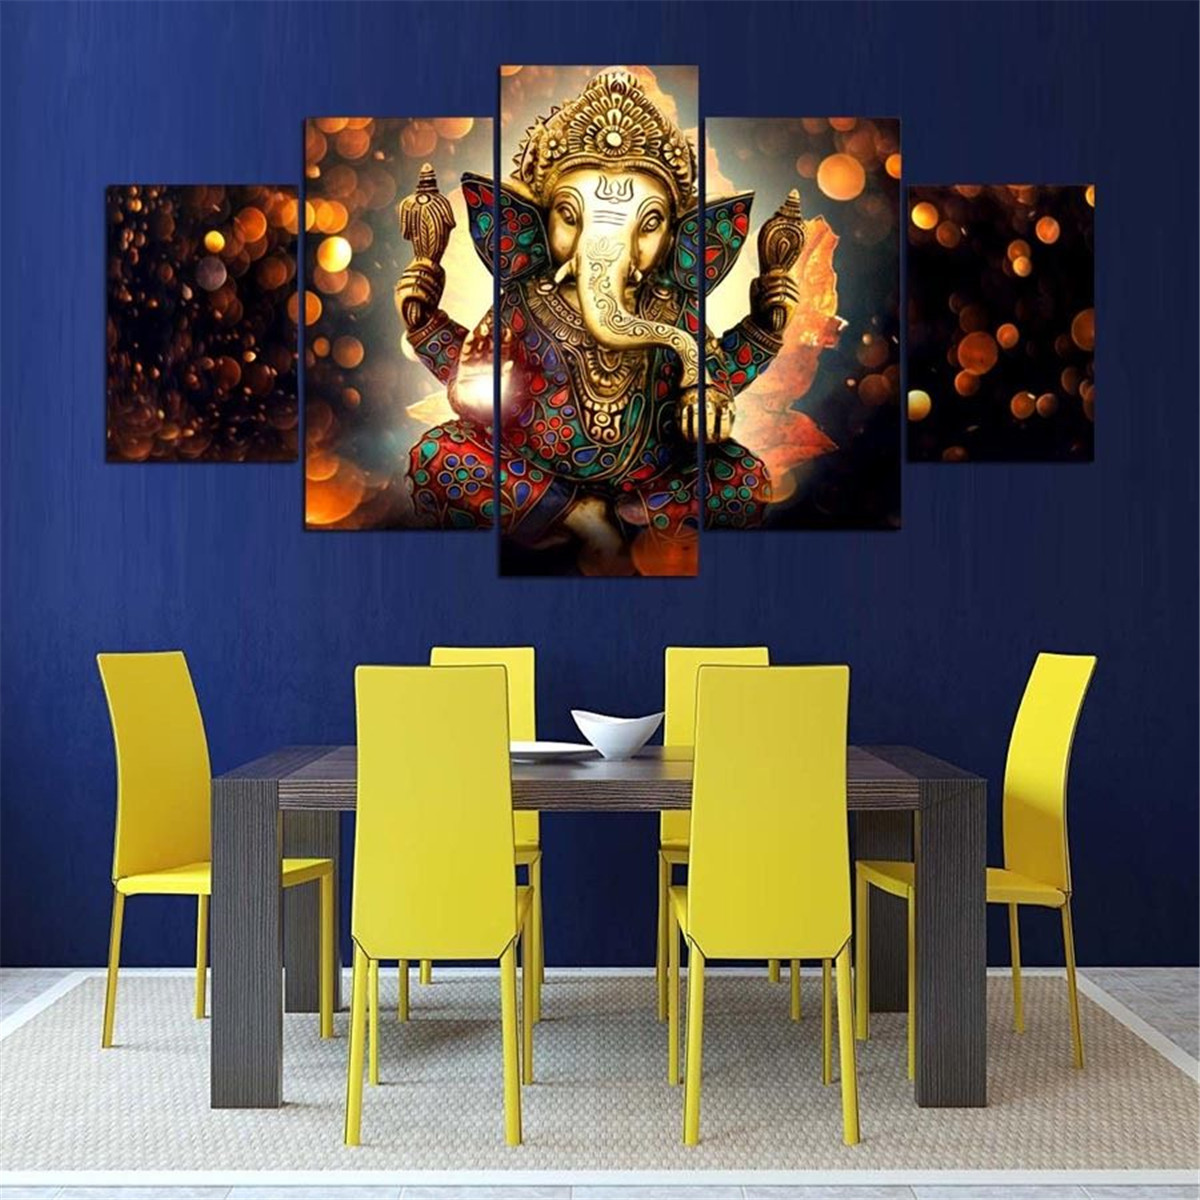 5 Pcs Canvas Ganesha Painting Indian Style Framed/Frameless Poster Printing Wall Art Decor Picture for Home Office Decoration